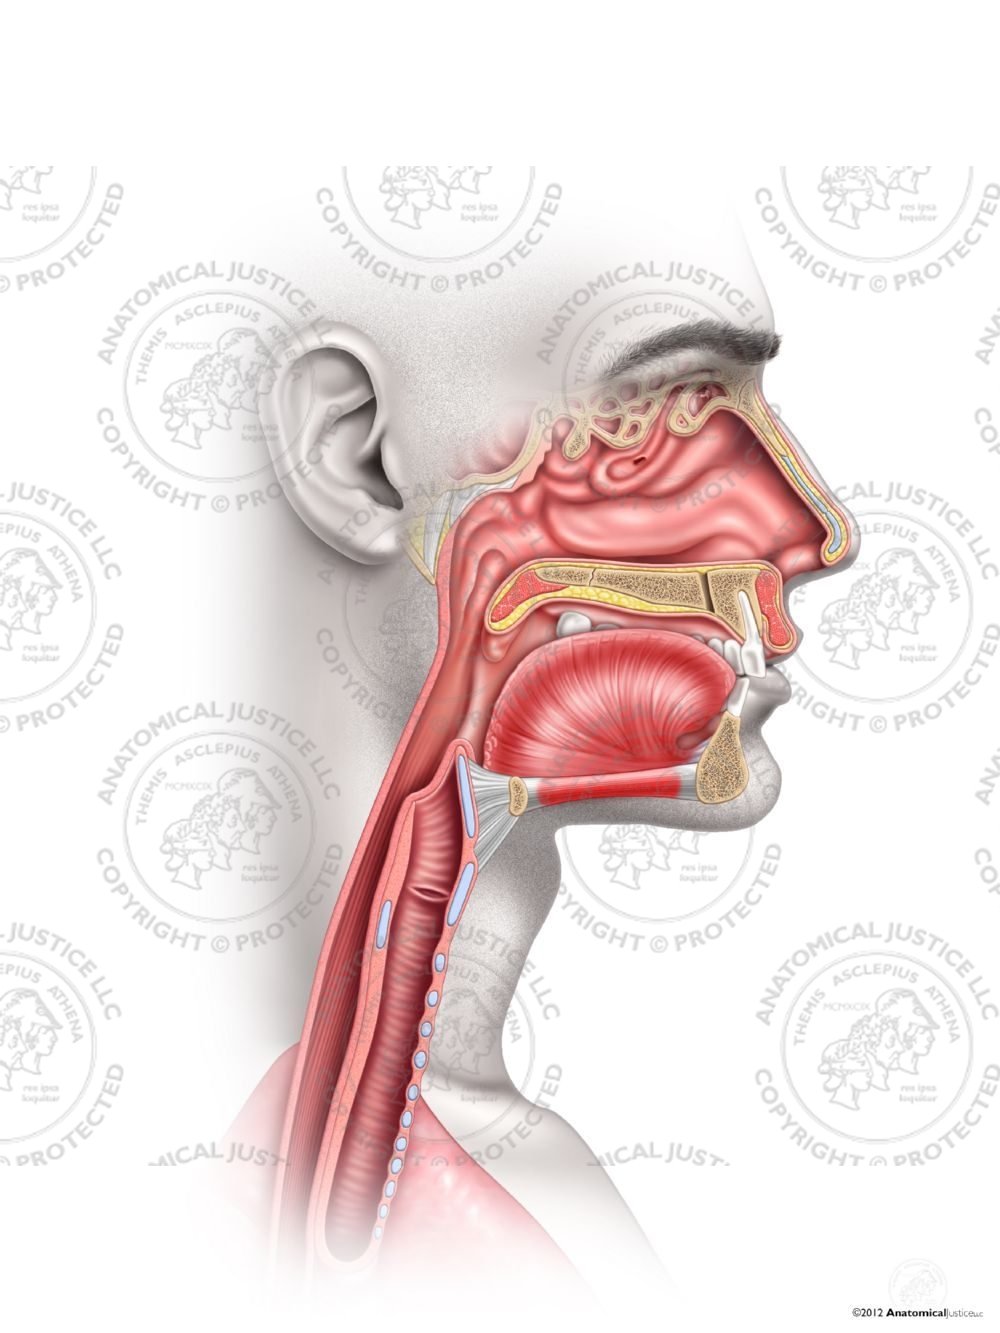 Normal Male Anatomy of the Right Throat – No Text